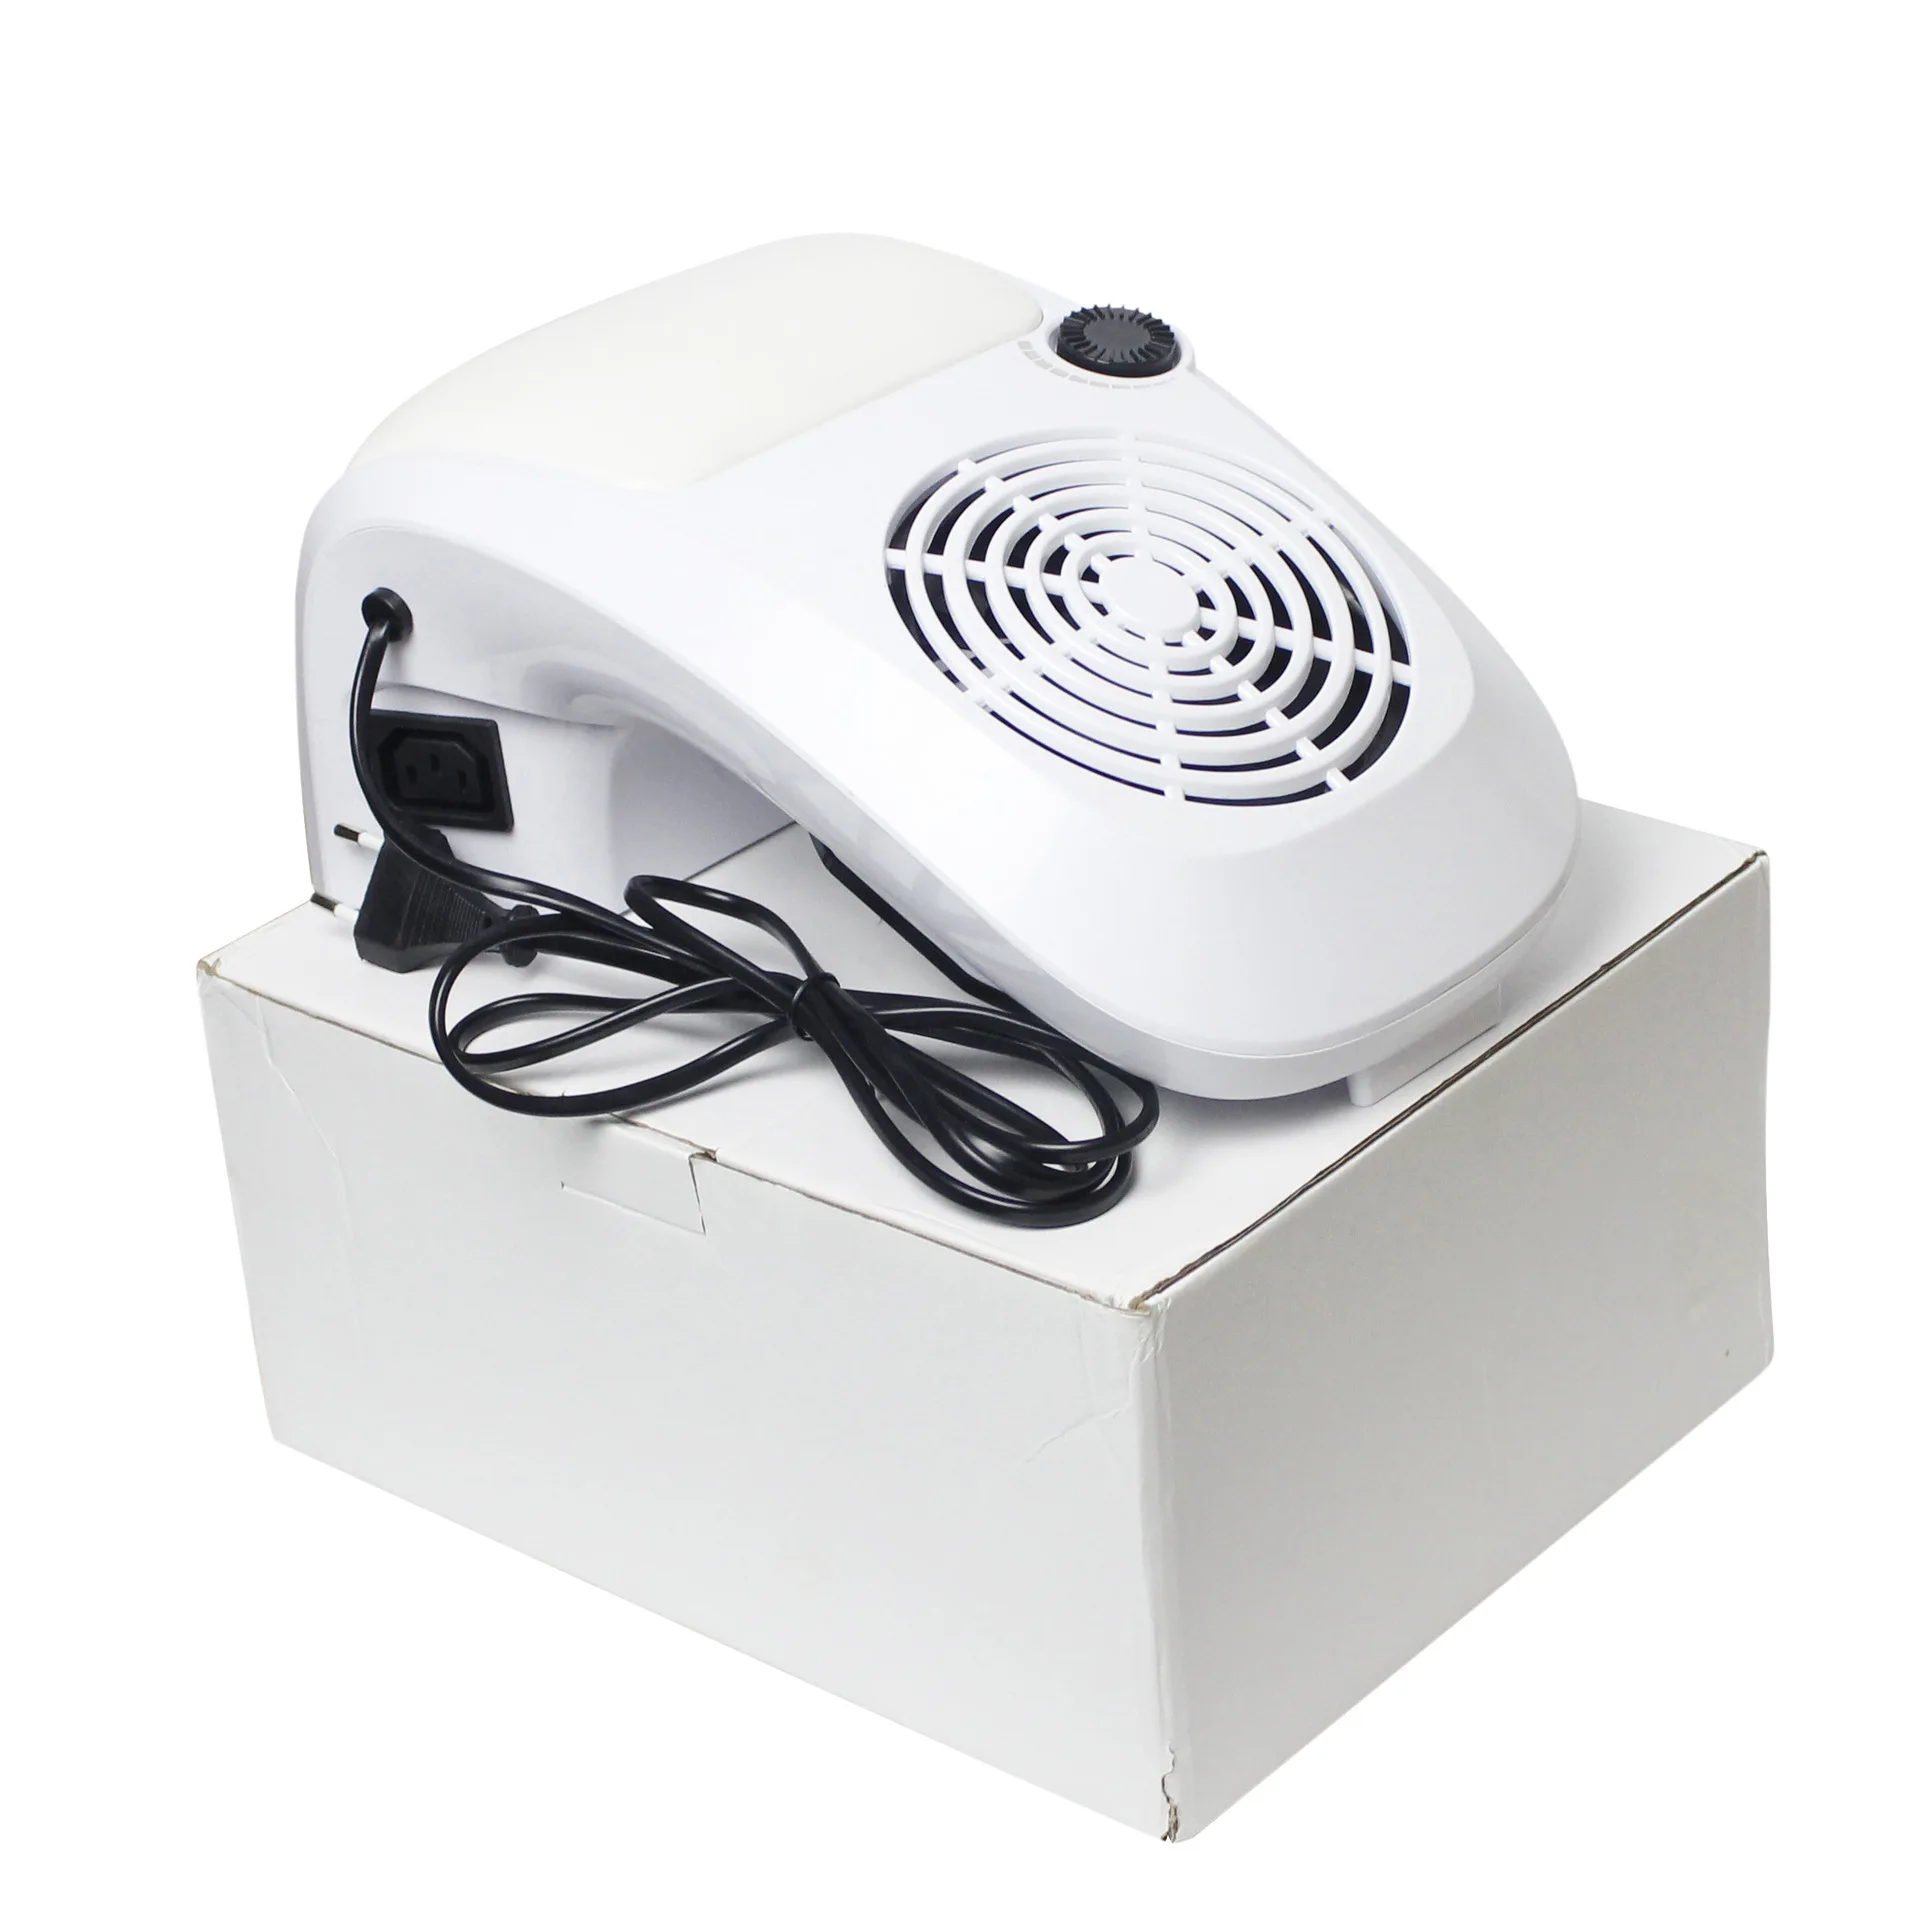 

45w adjustable wind fans aspirateur ongles nail vacuum cleaner dust collector for nail salon aspiratore unghie machine, White